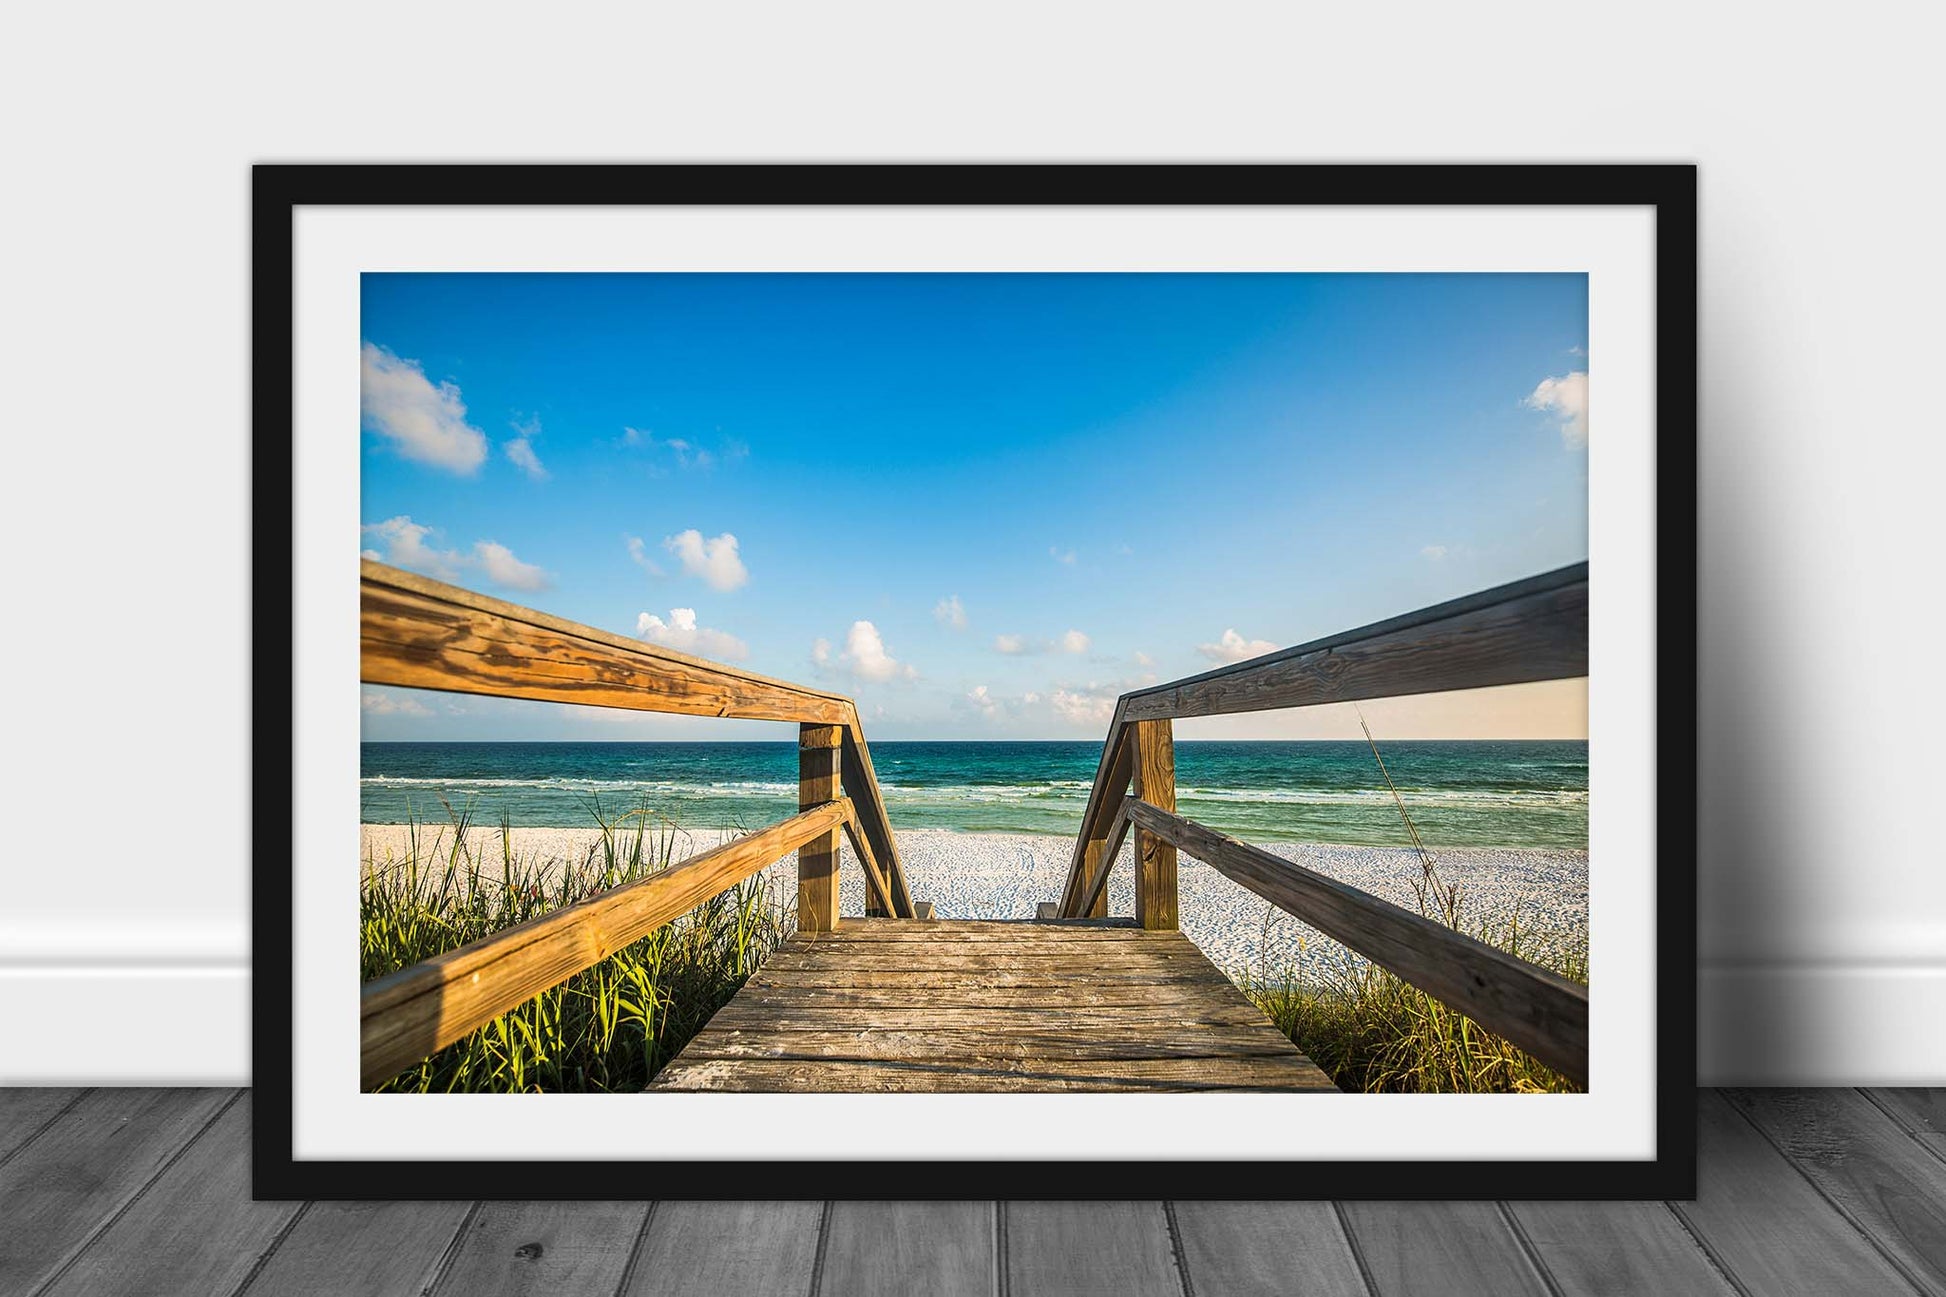 Framed coastal photography print with optional mat of a sandy boardwalk leading to a beach on a summer day along the Gulf Coast near Destin, Florida by Sean Ramsey of Southern Plains Photography.